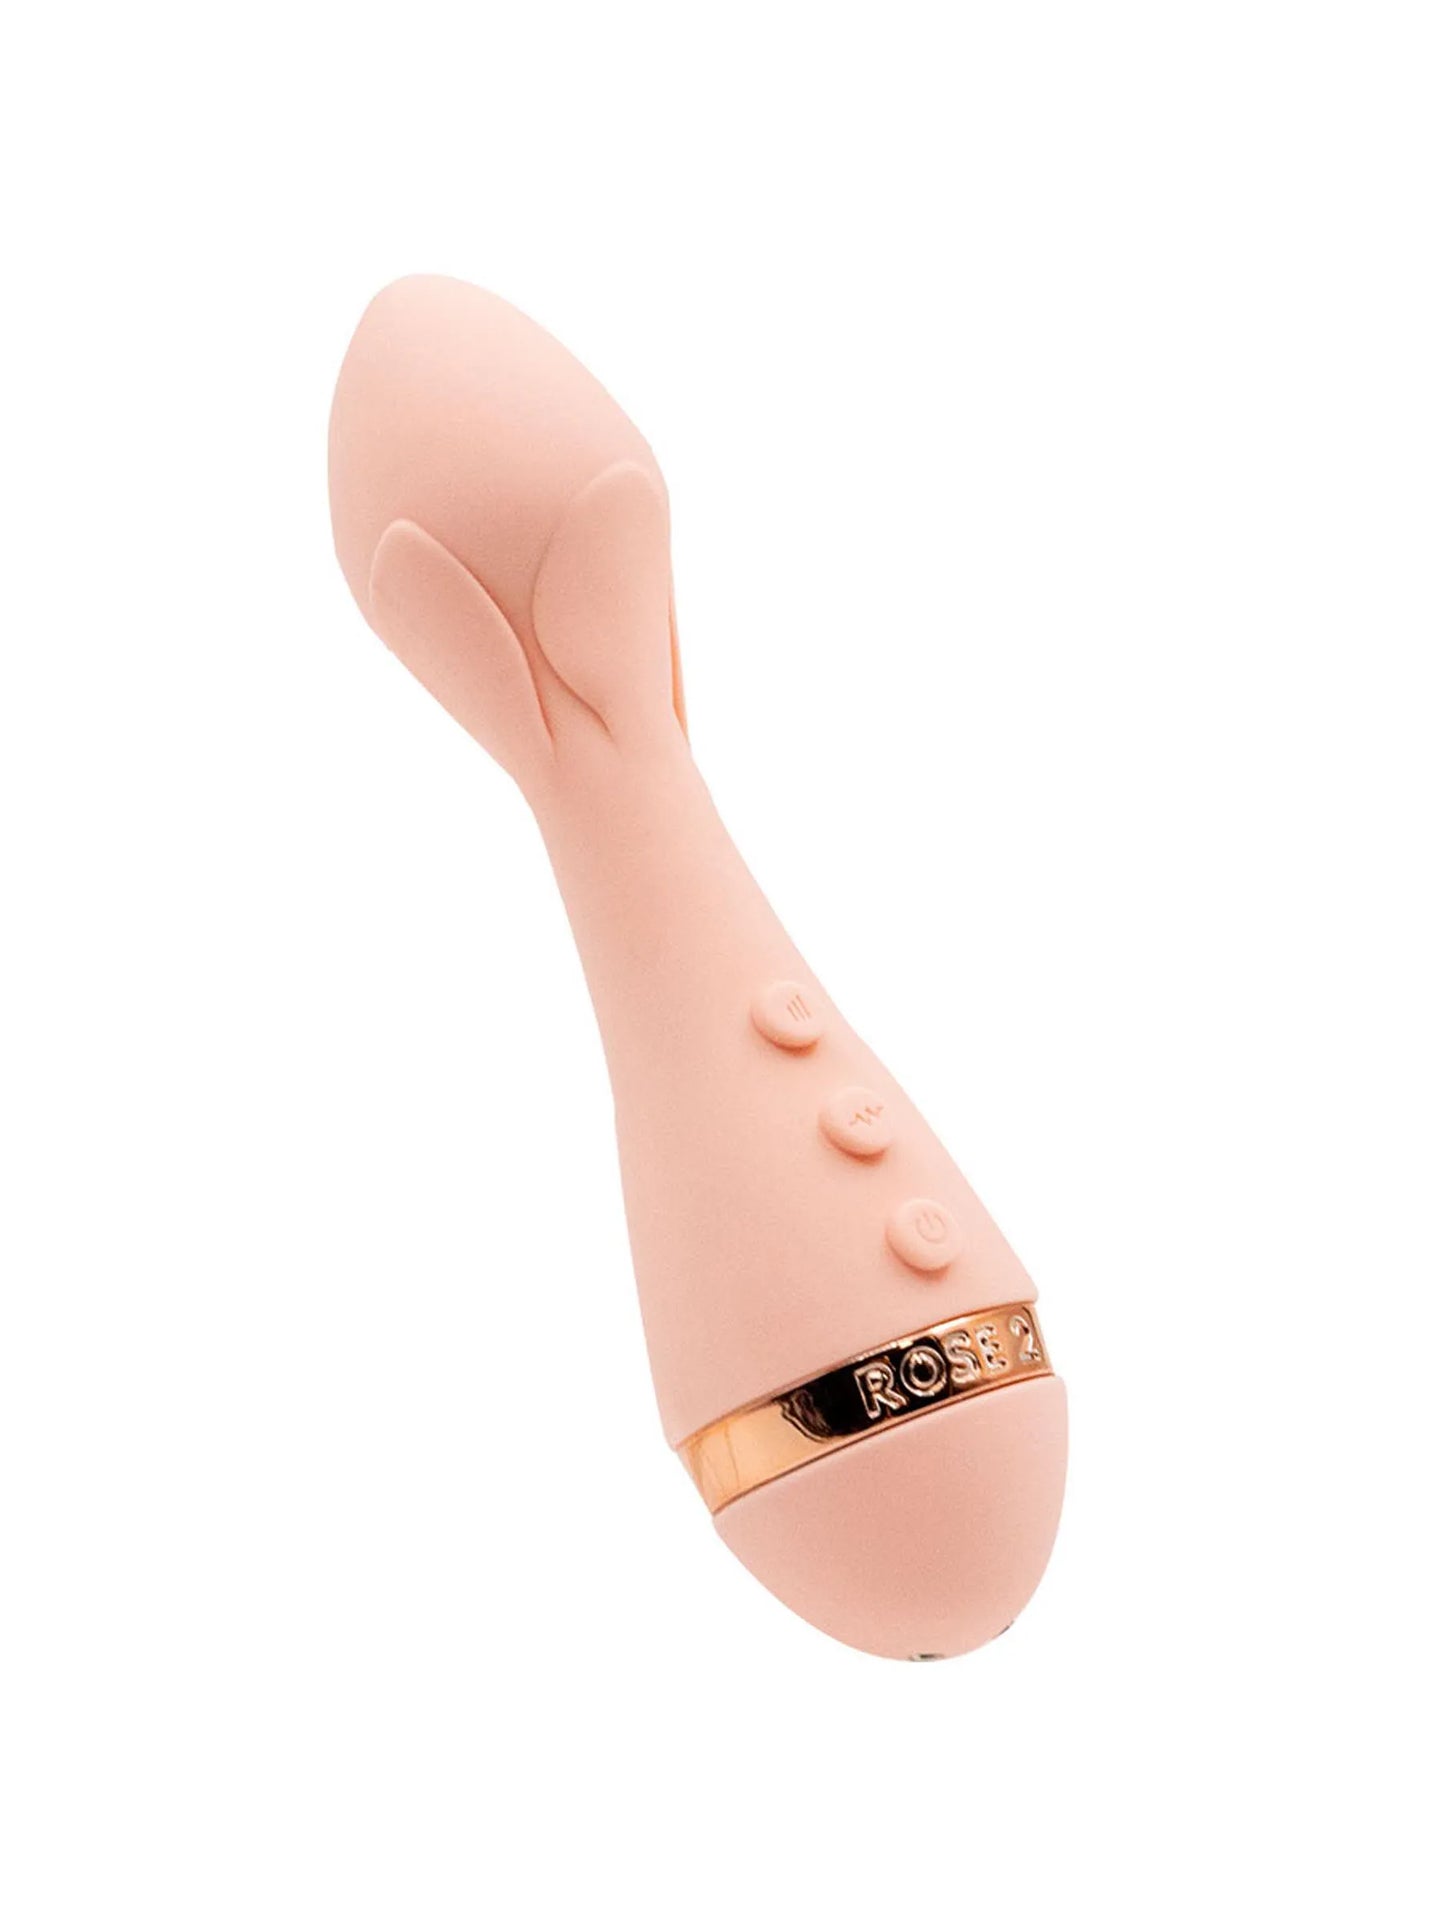 Vush Rose Clitoral Vibrator From Ann Summers, Image 06